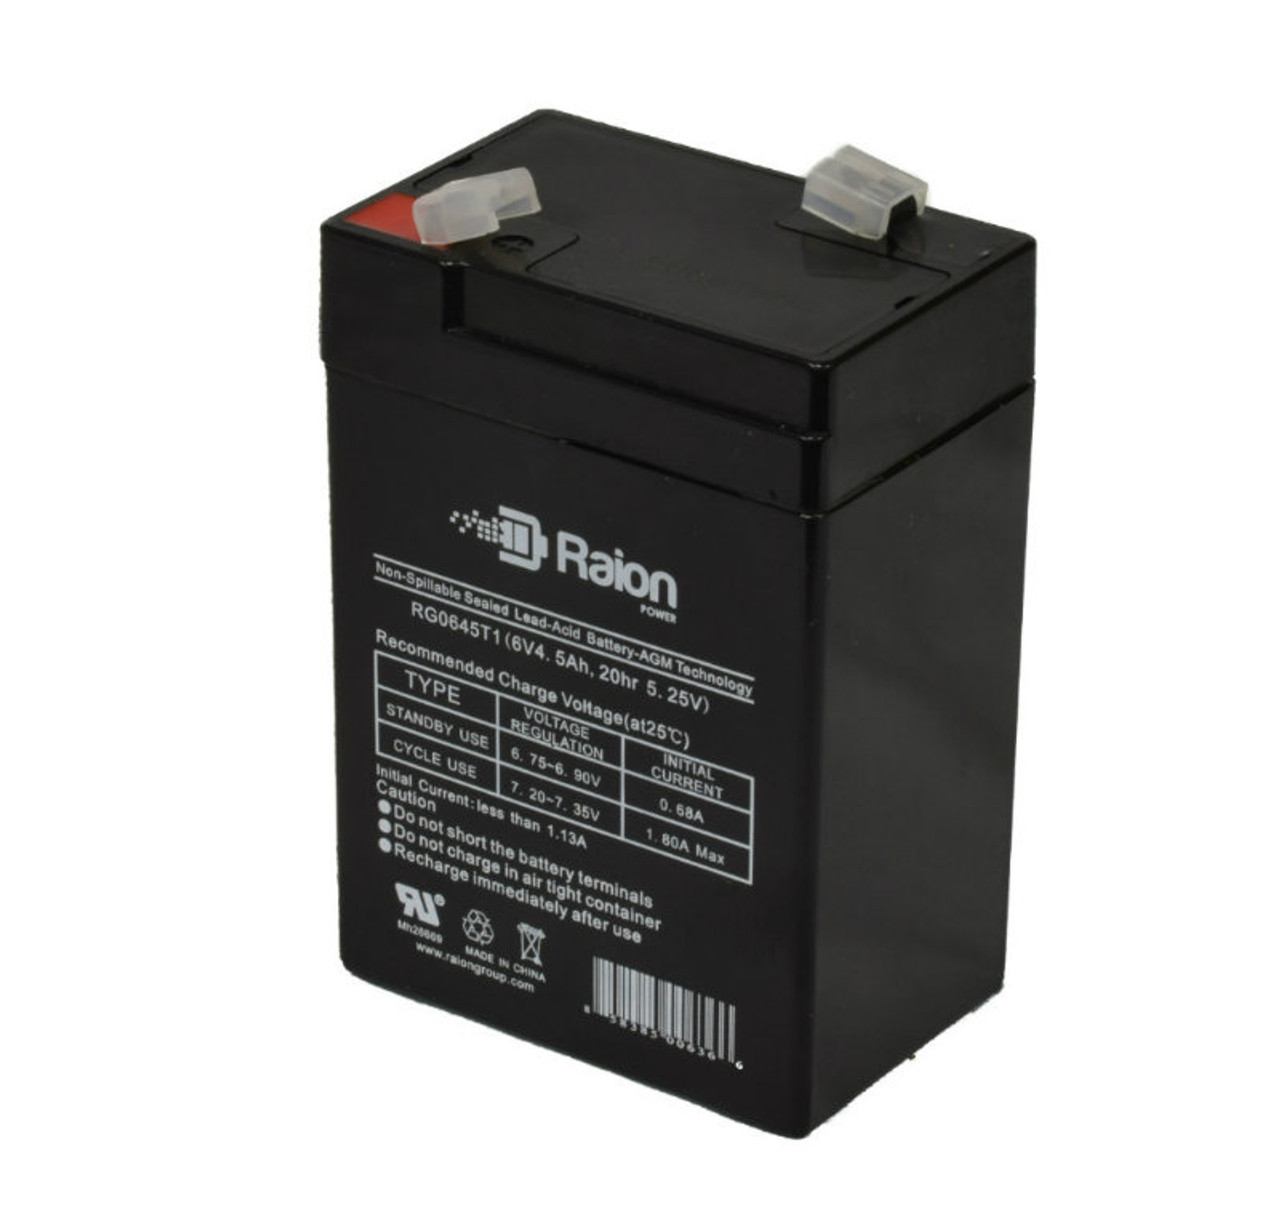 Raion Power RG0645T1 6V 4.5Ah Replacement Battery Cartridge for Chloride 100001045